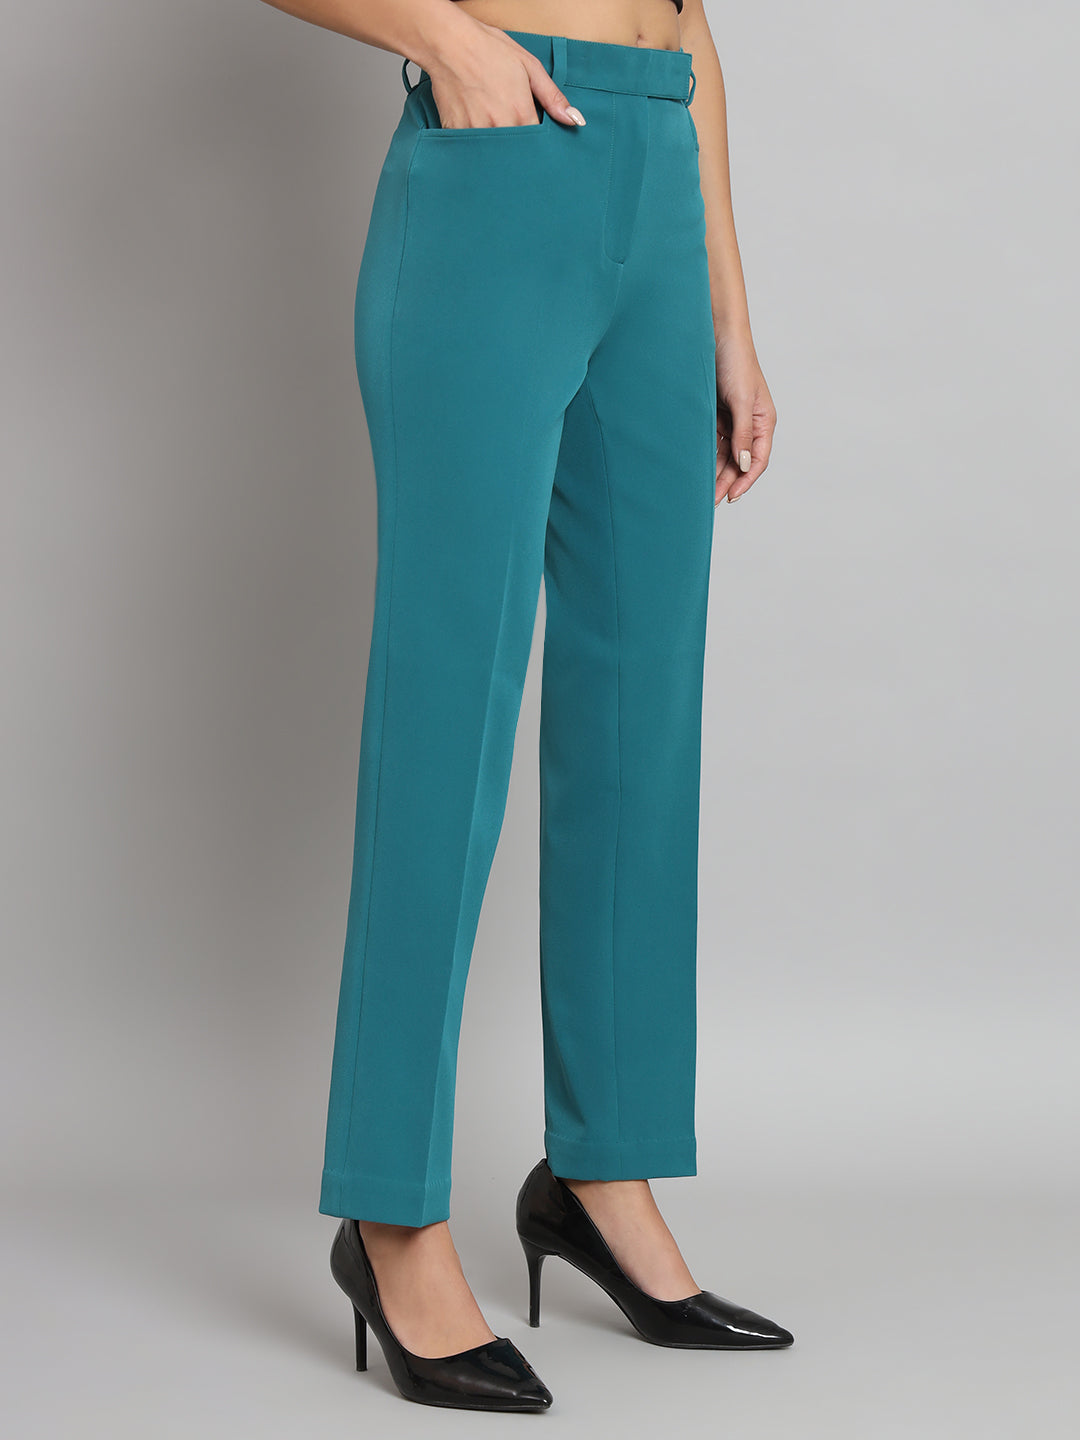 Buy Teal Blue Trousers & Pants for Women by AND Online | Ajio.com